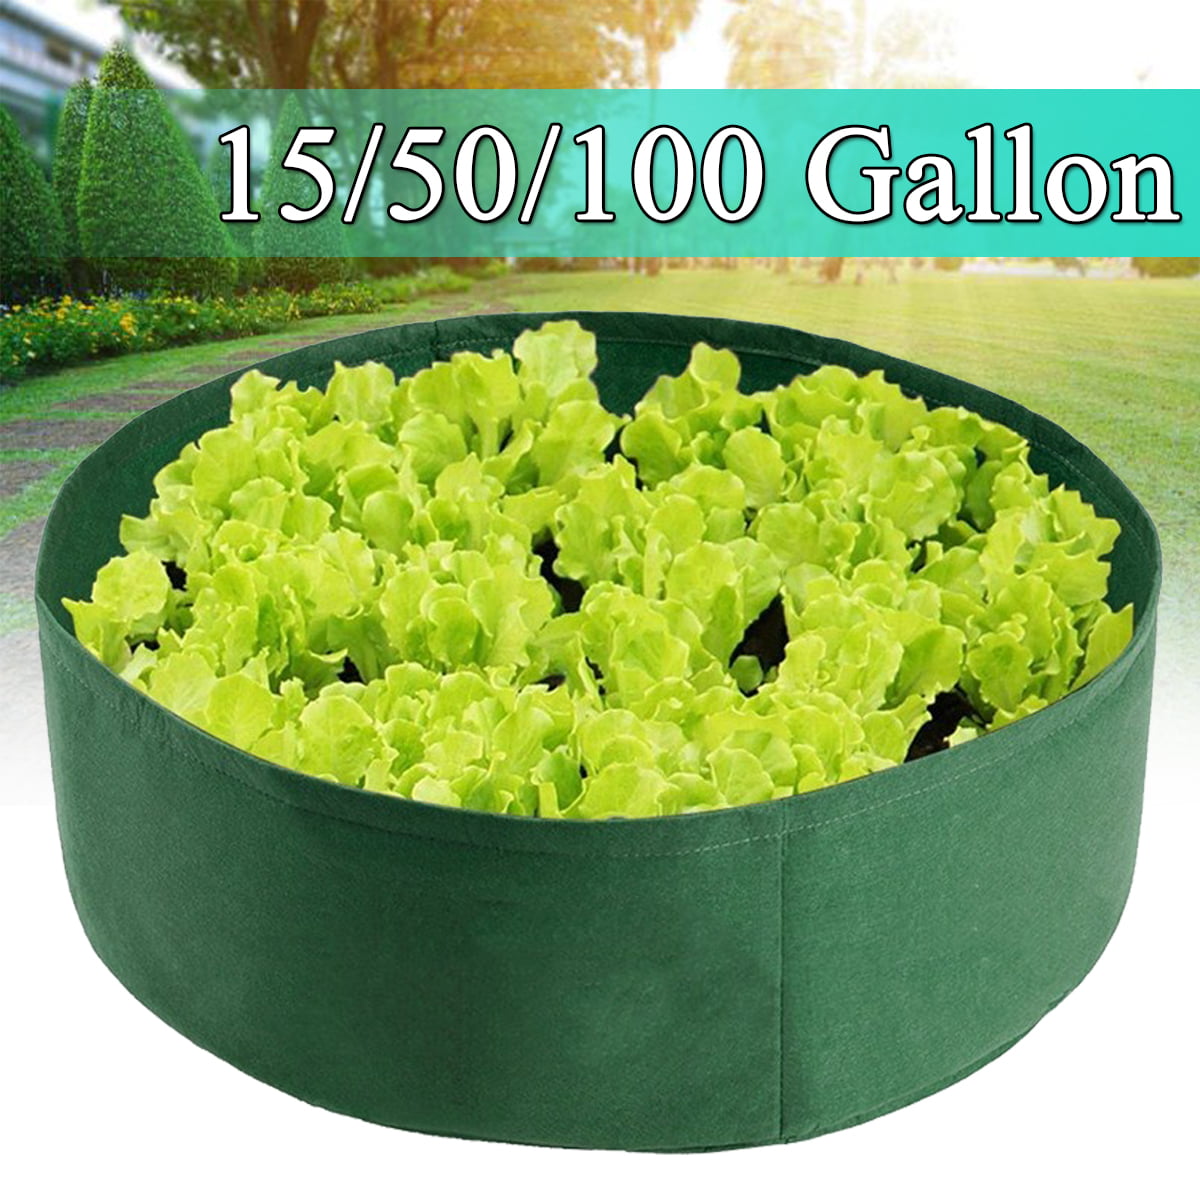 Fabric Raised Garden Bed 50 Gallons Round Planting Container Grow Bags